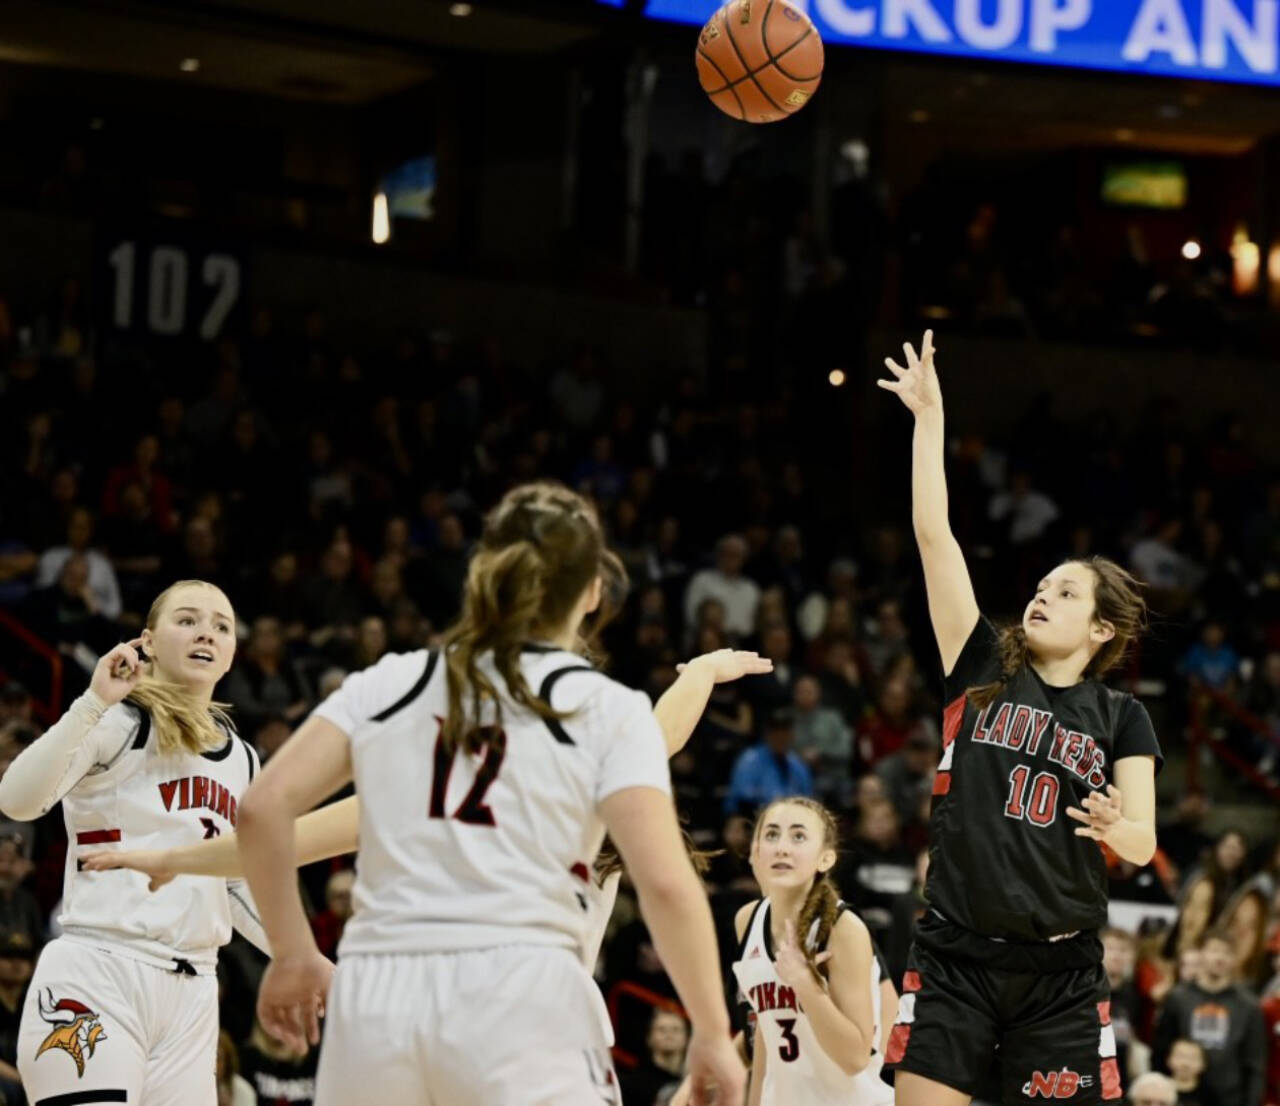 Neah Bay’s Allie Greene shoots a floater over the Mossyrock defense Saturday night in Spokane. Greene finished with 19 points, leading all scorers, in the 56-54 Neah Bay win. (Bridget Mayfield/for Peninsula Daily News)